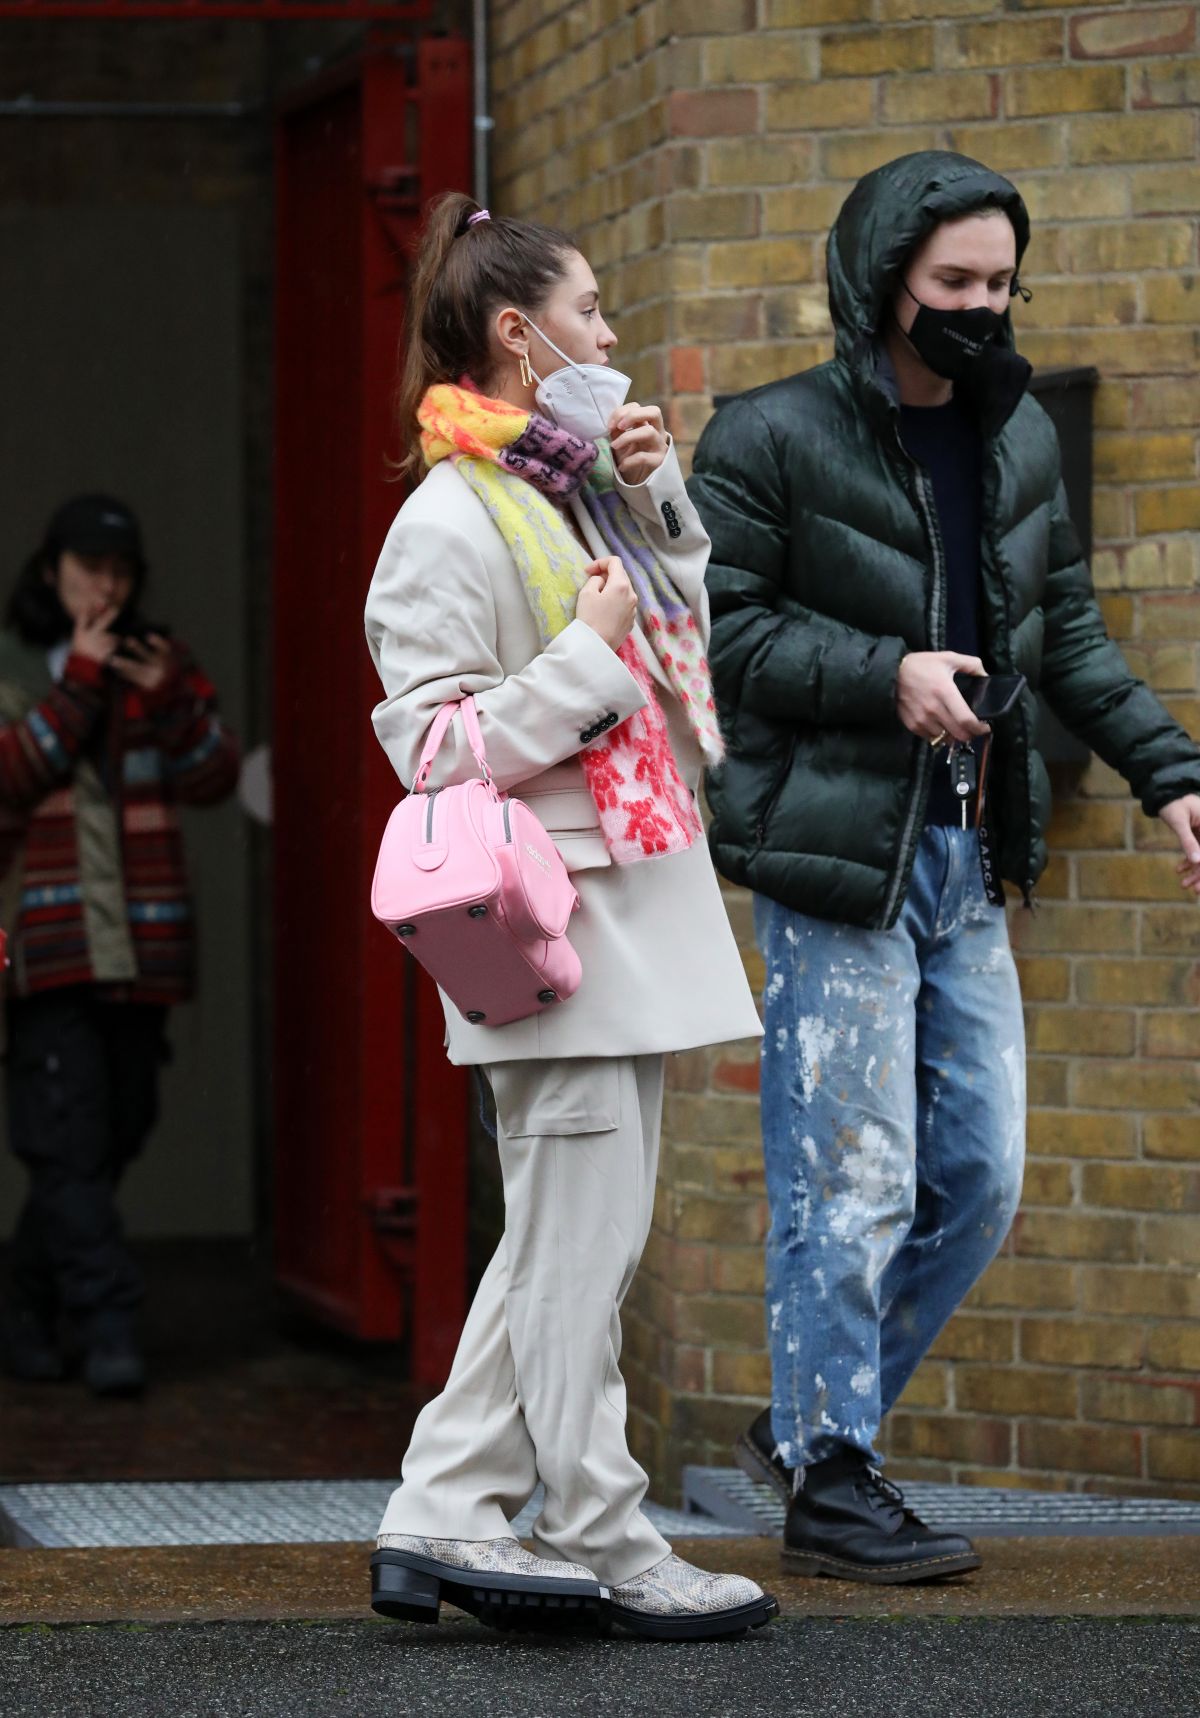 iris-law-arrives-at-a-photoshoot-in-london-02-03-2021-0.jpg